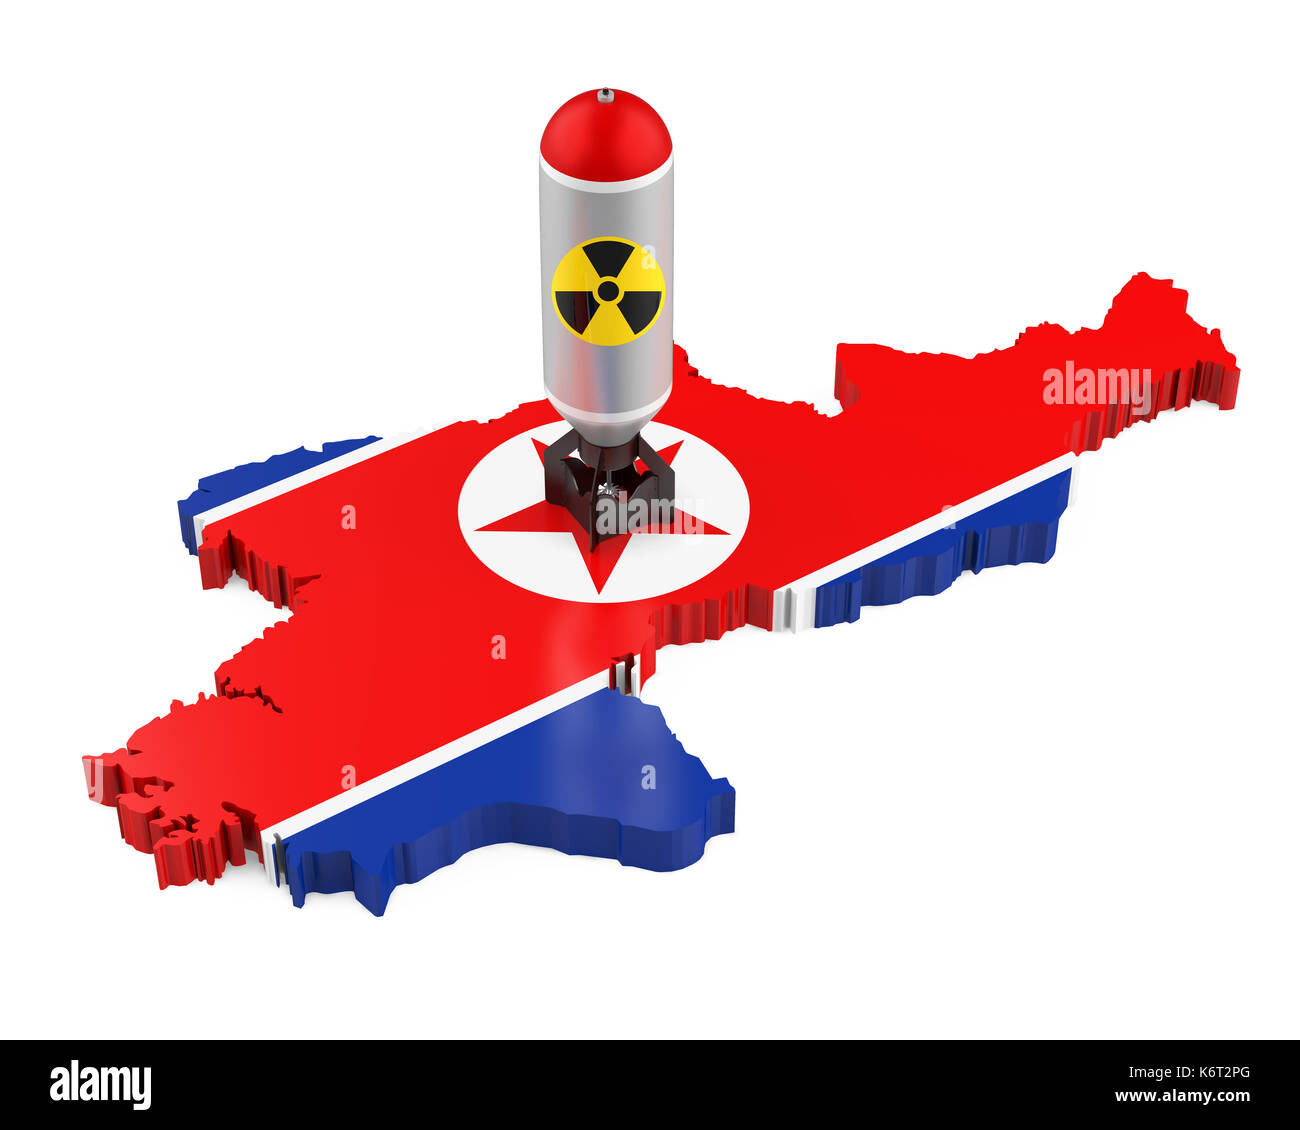 North Korea Map with Nuclear Sign Stock Photo